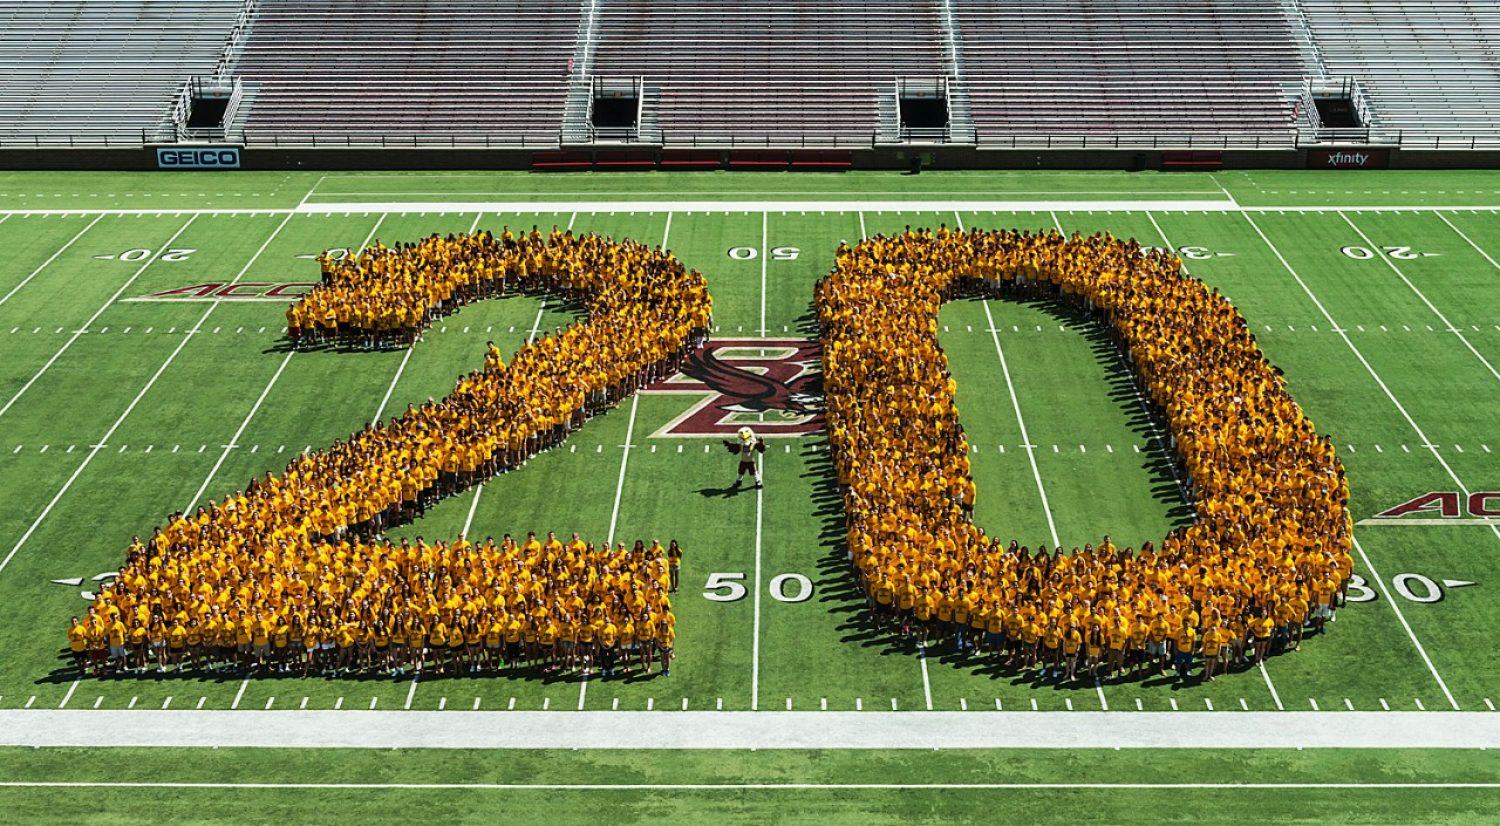 BC Class of 2020 first official photo in Alumni Stadium